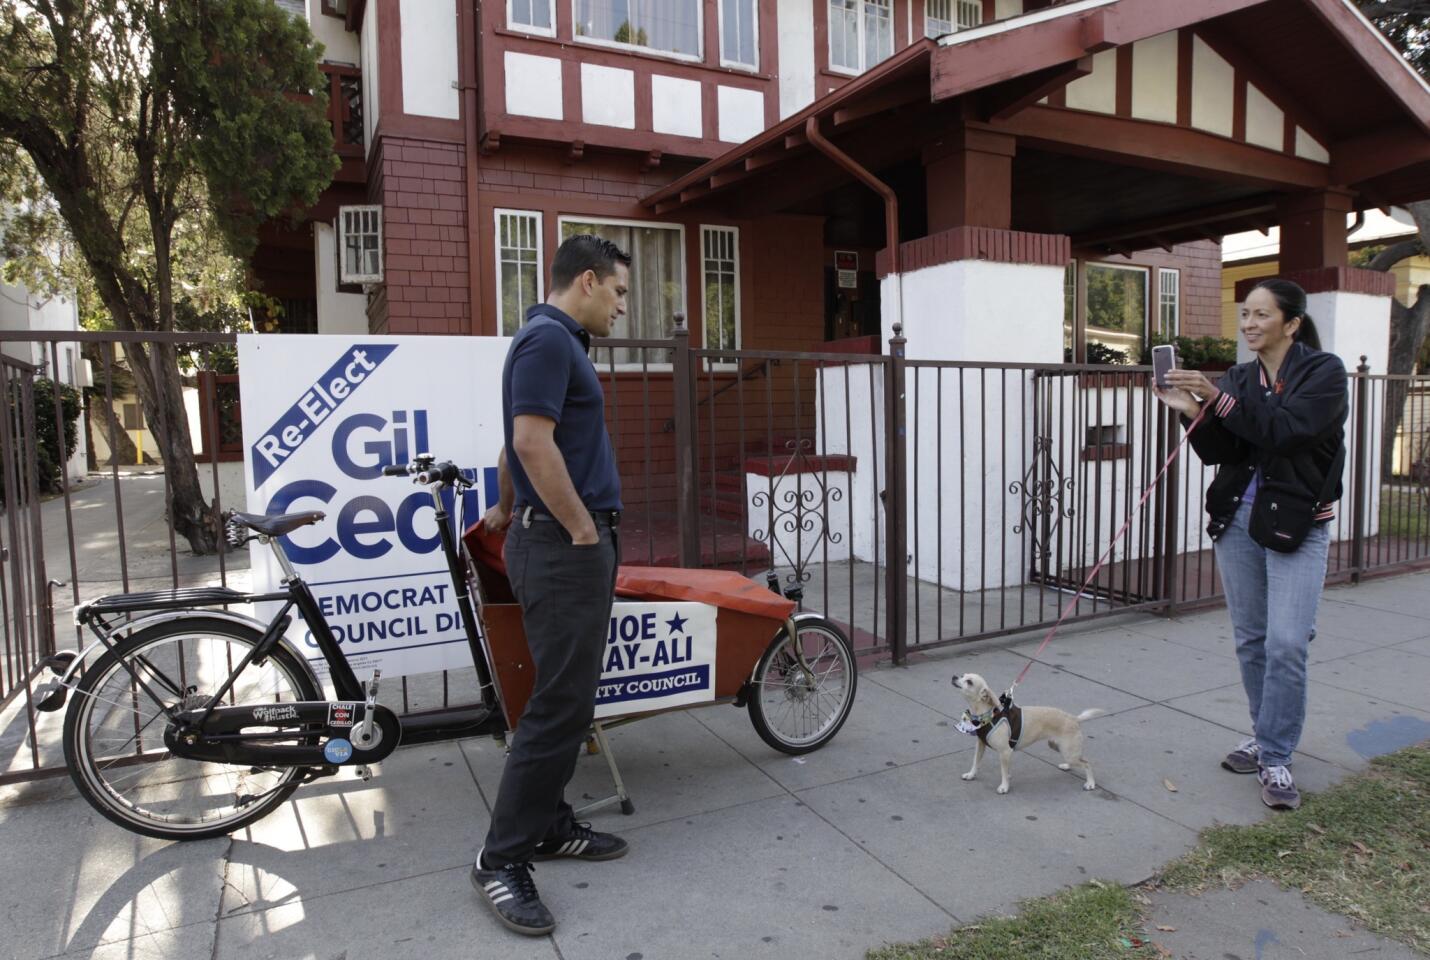 L.A. voters go to the polls